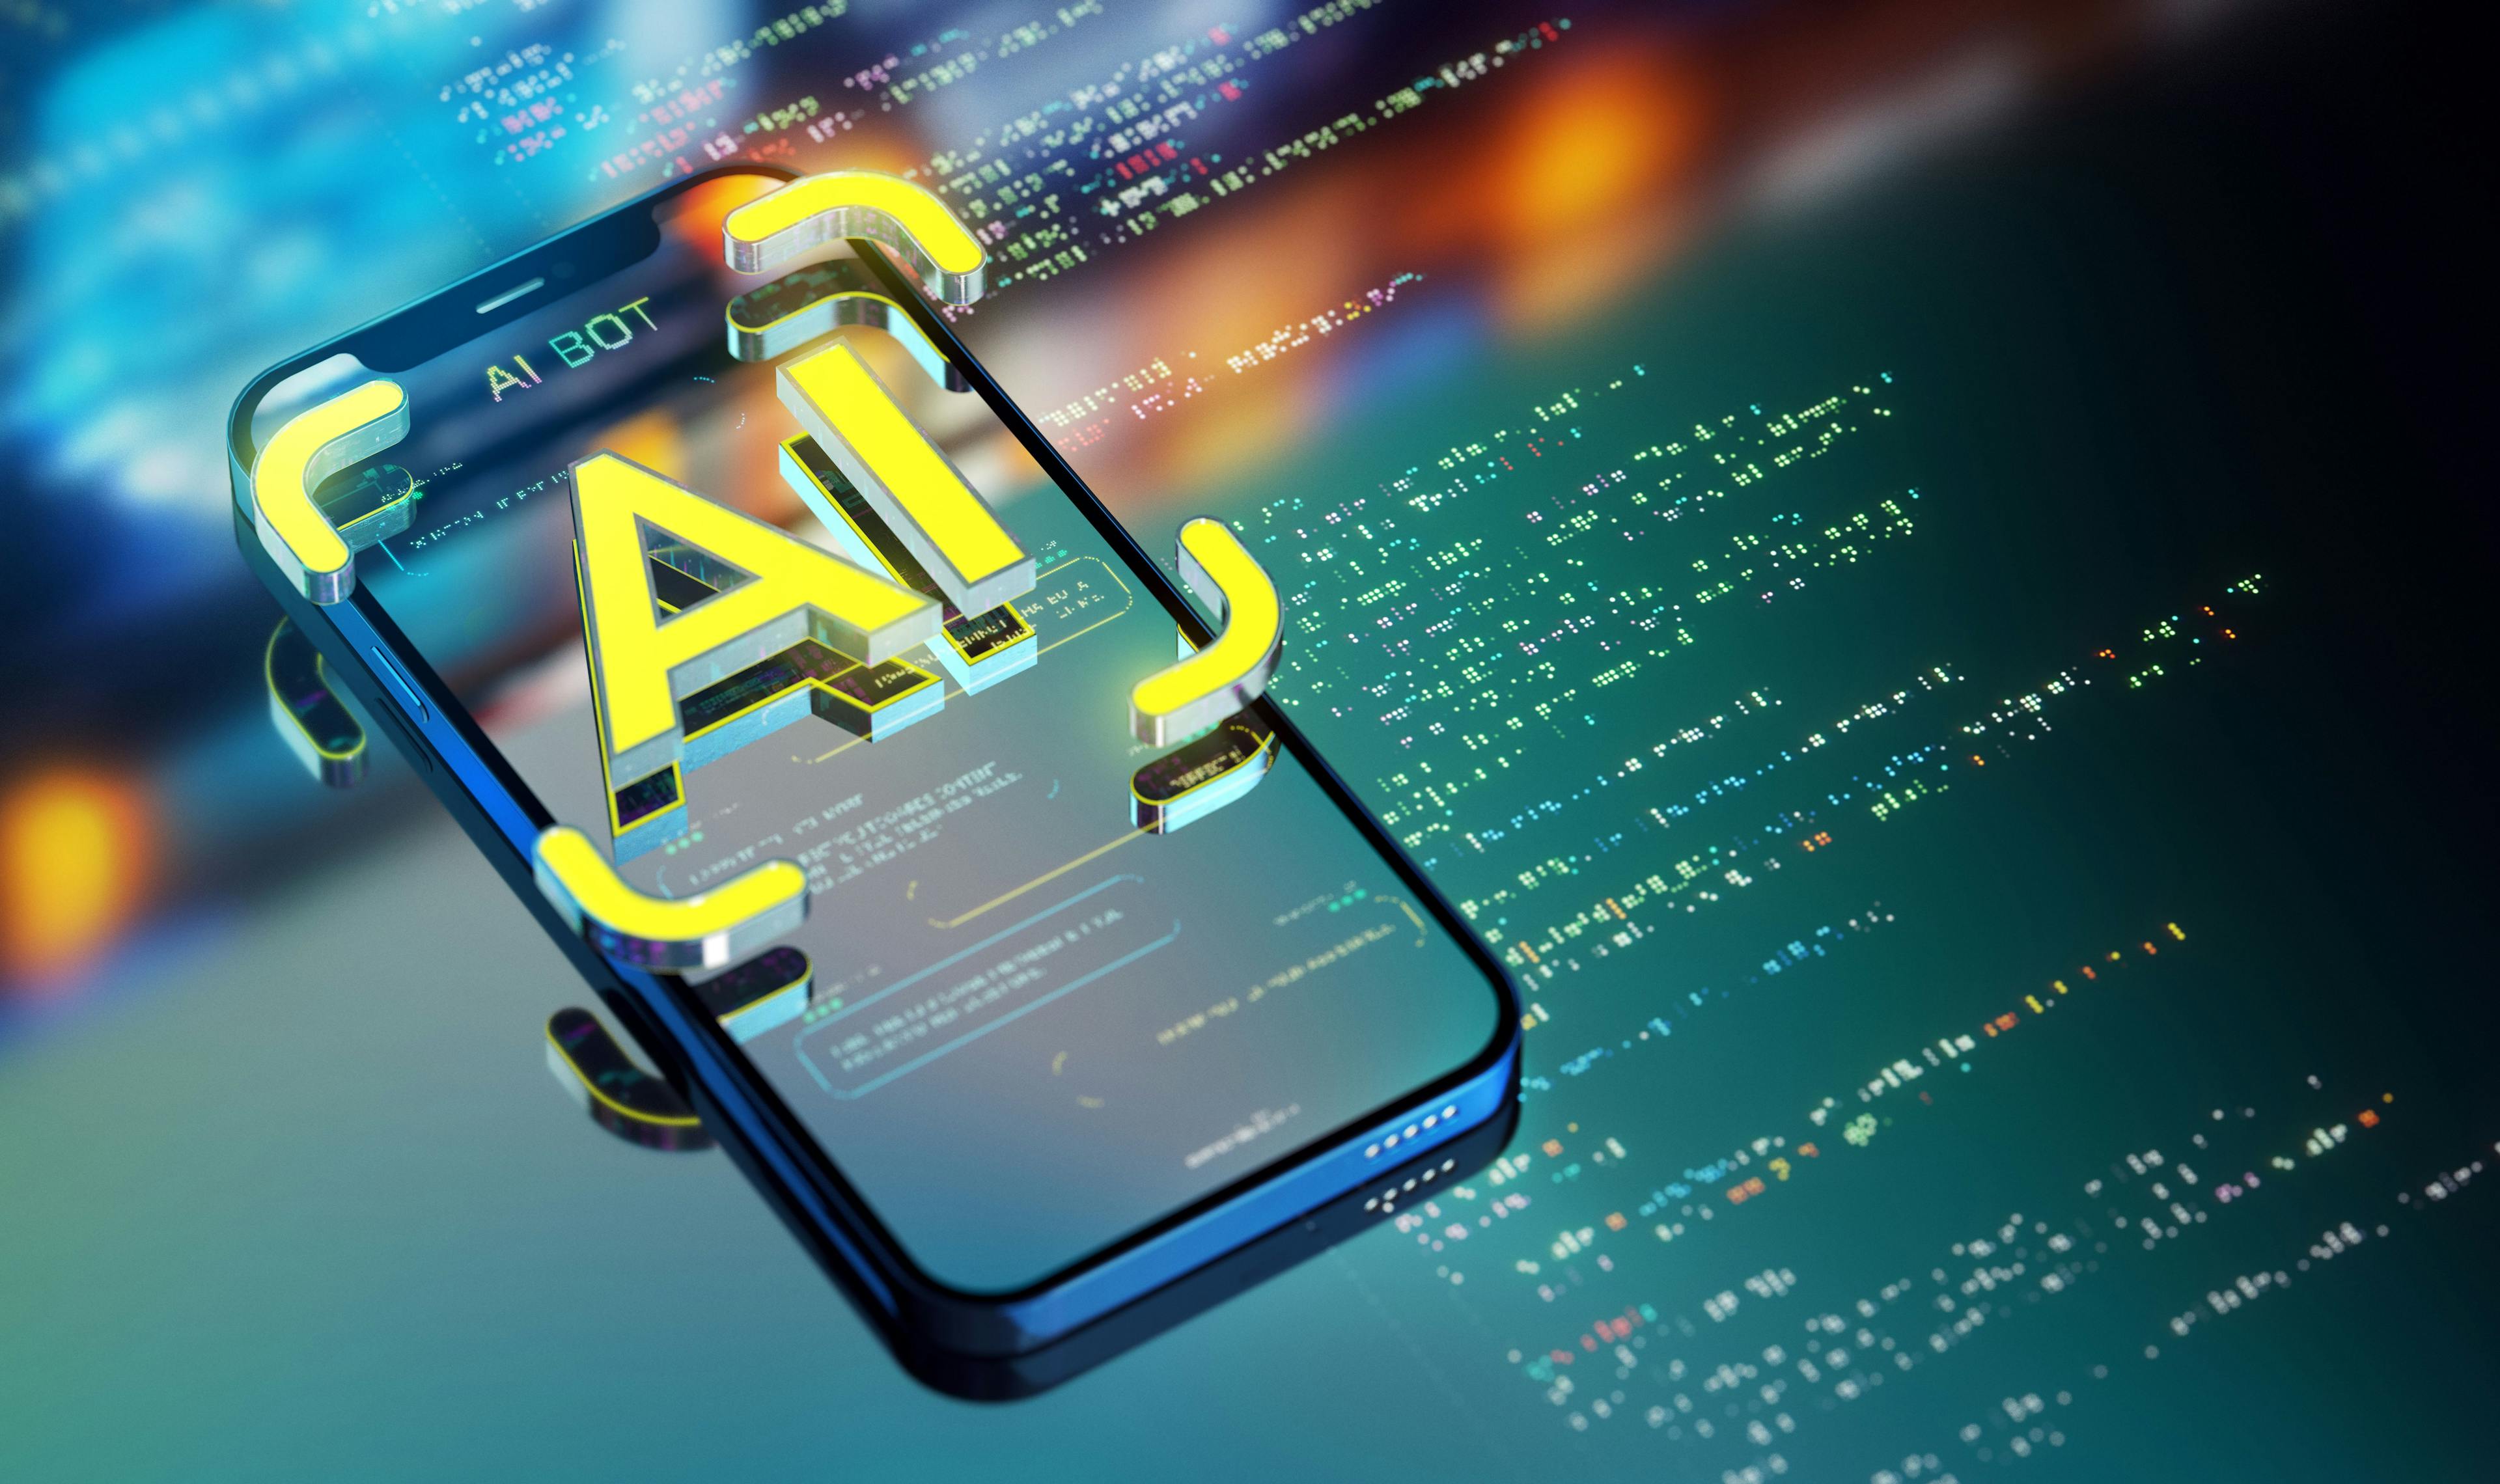 An image of the term "AI" on a phone screen.